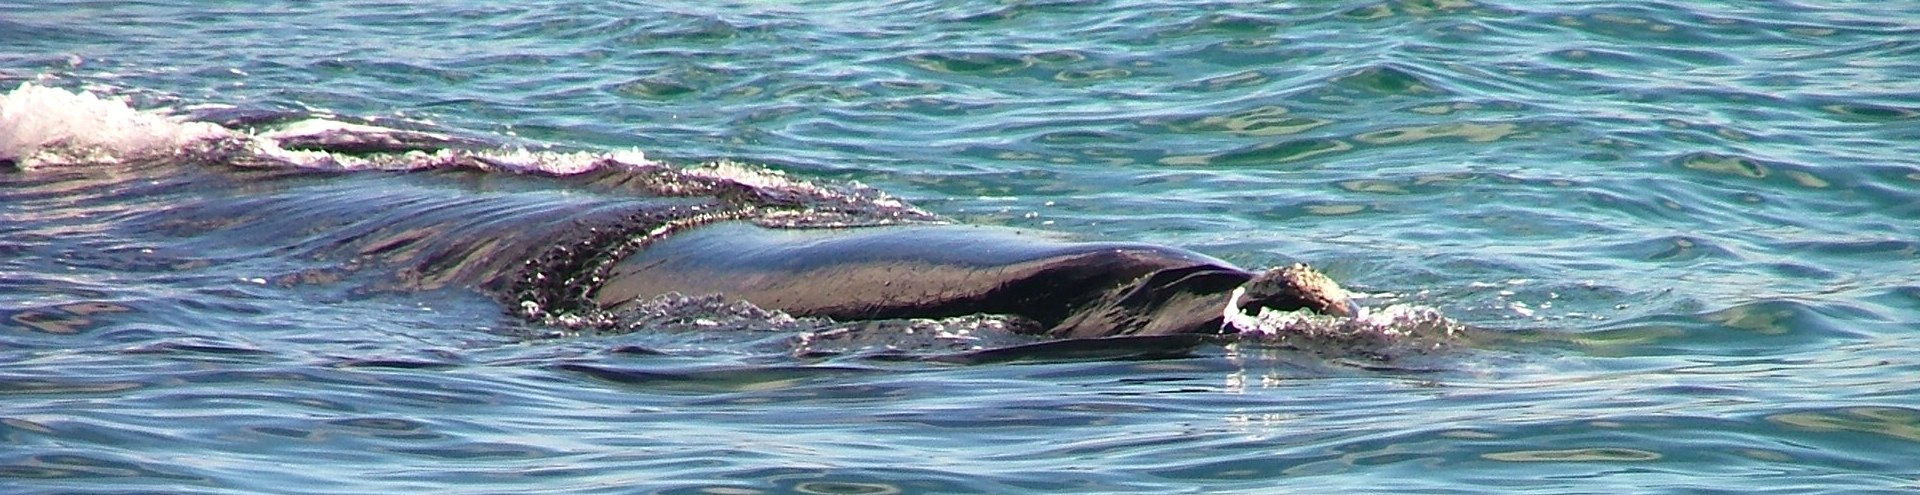 Southern Right Whale just off the Bluff Wharf. Copyright © Virtual Visions.